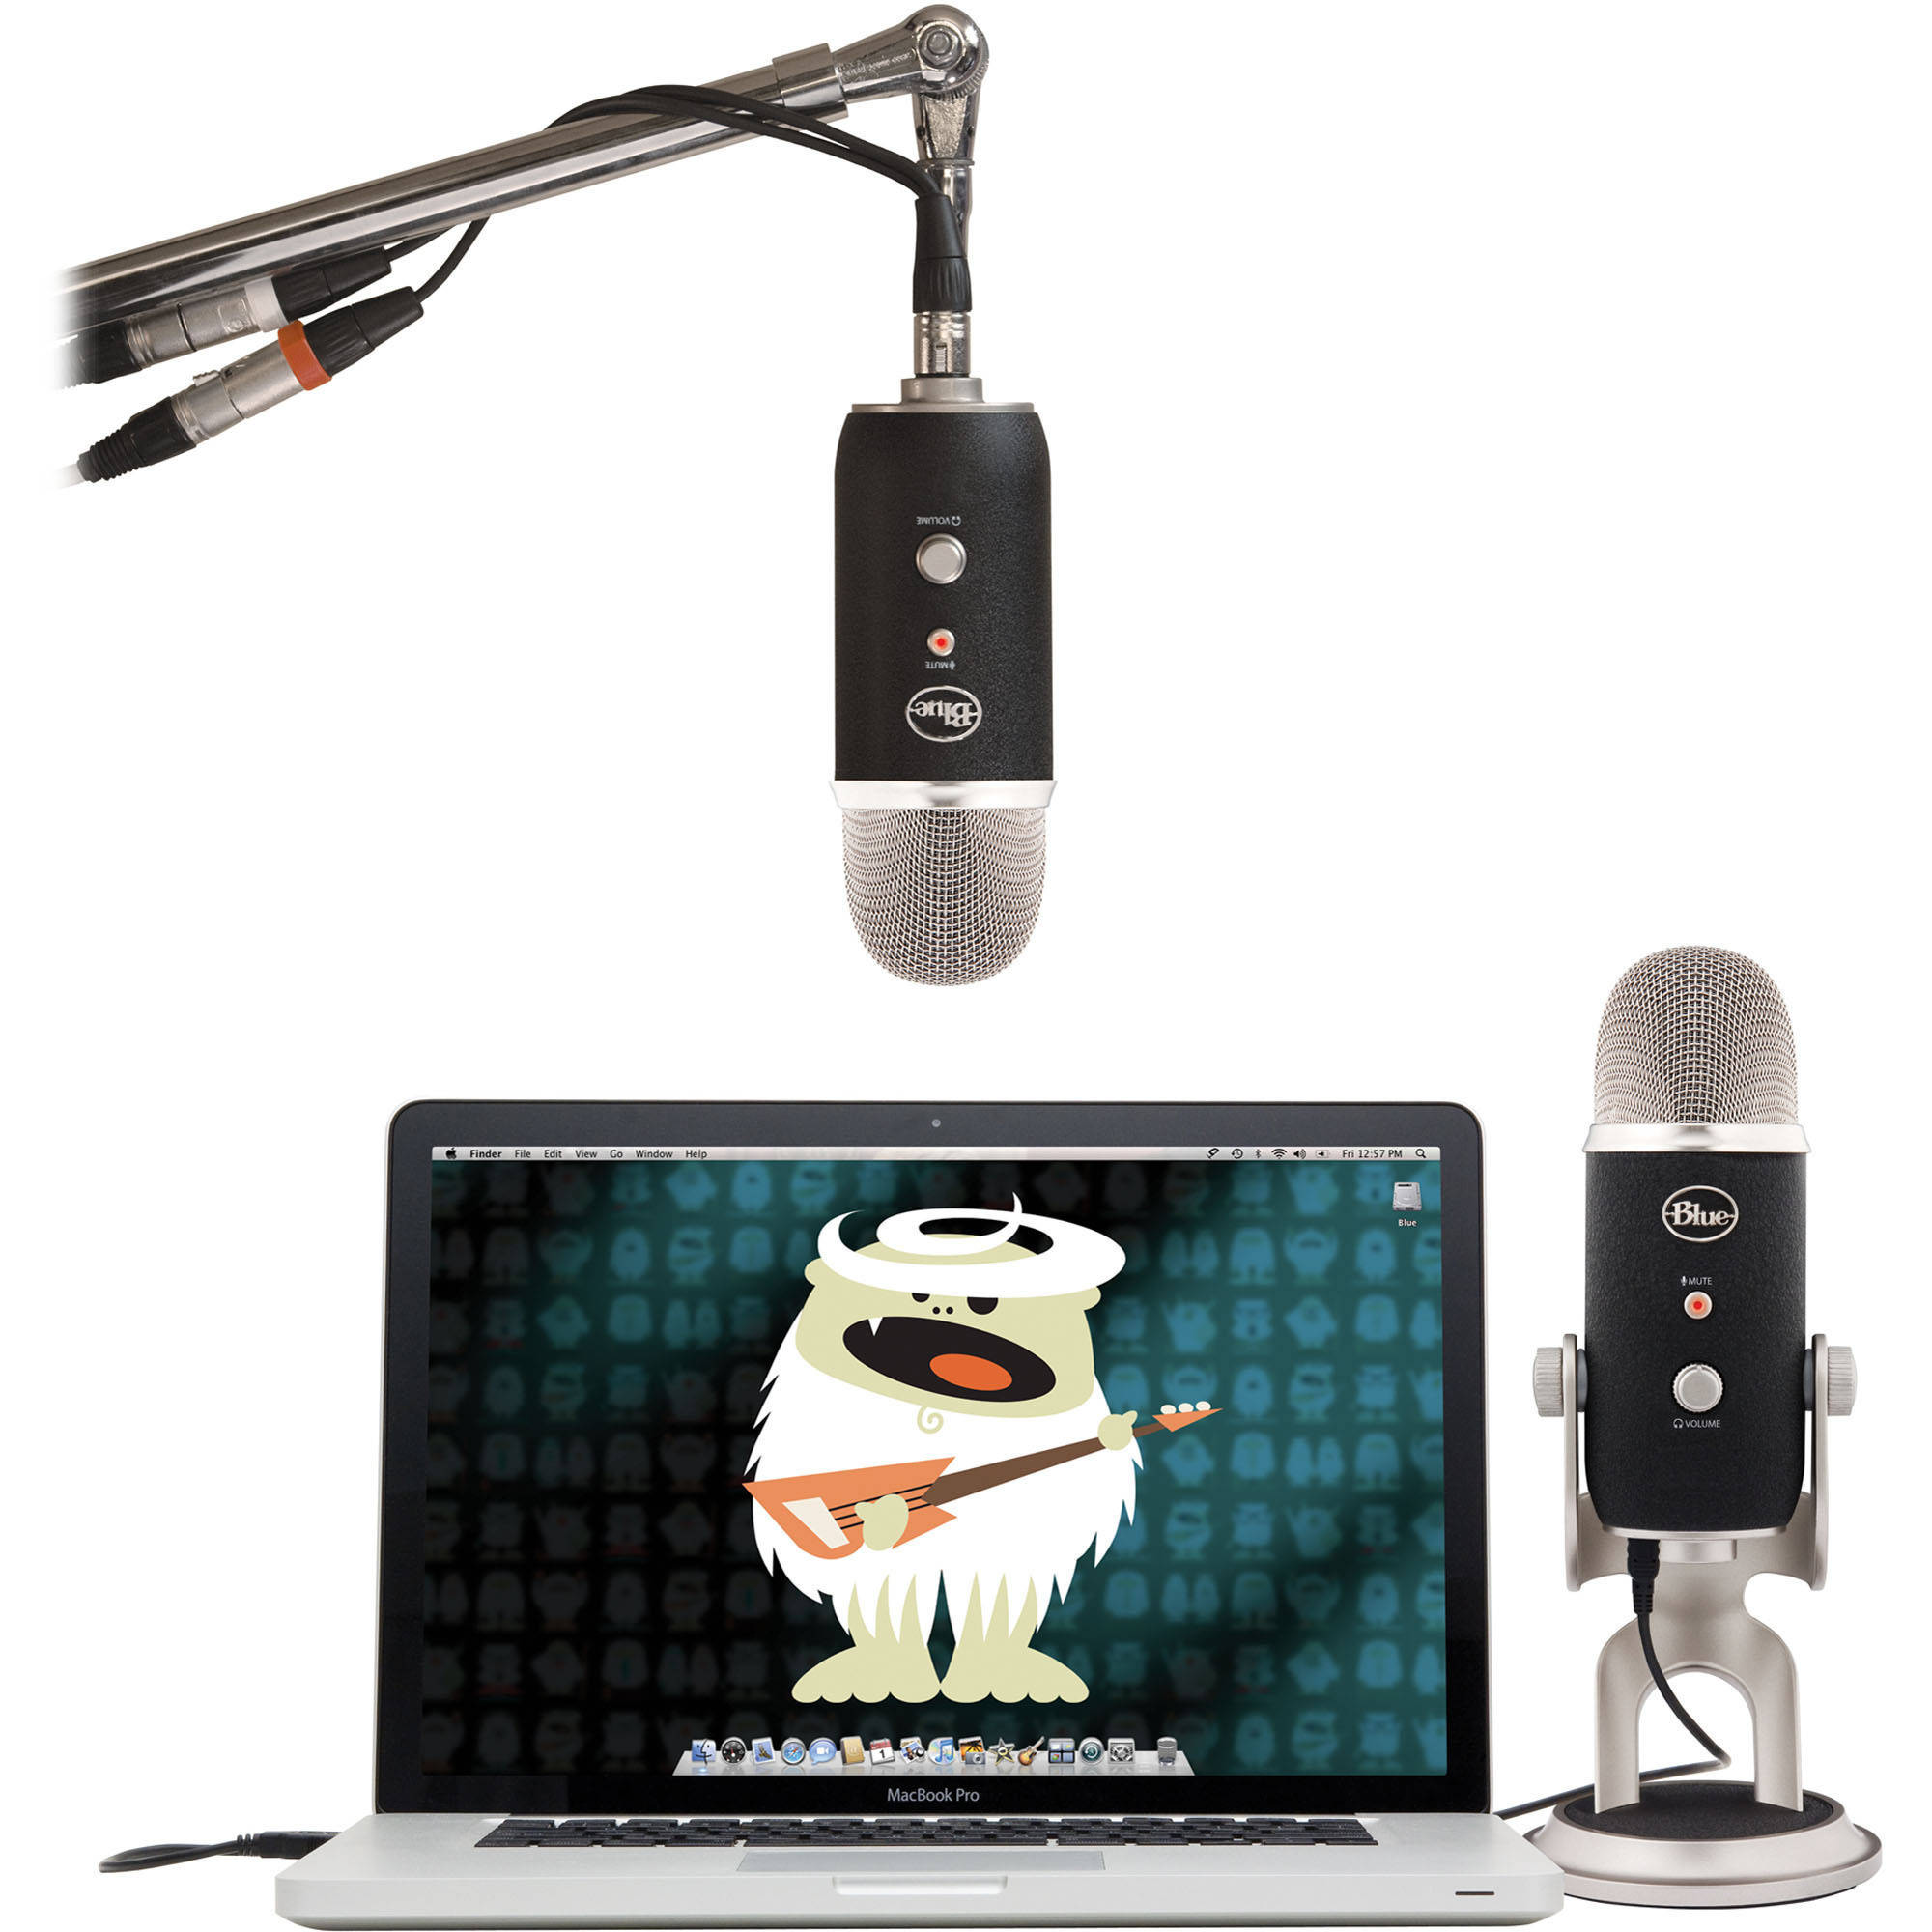 Blue Yeti Pro Microphone With Broadcast Arm And Pop Filter Kit